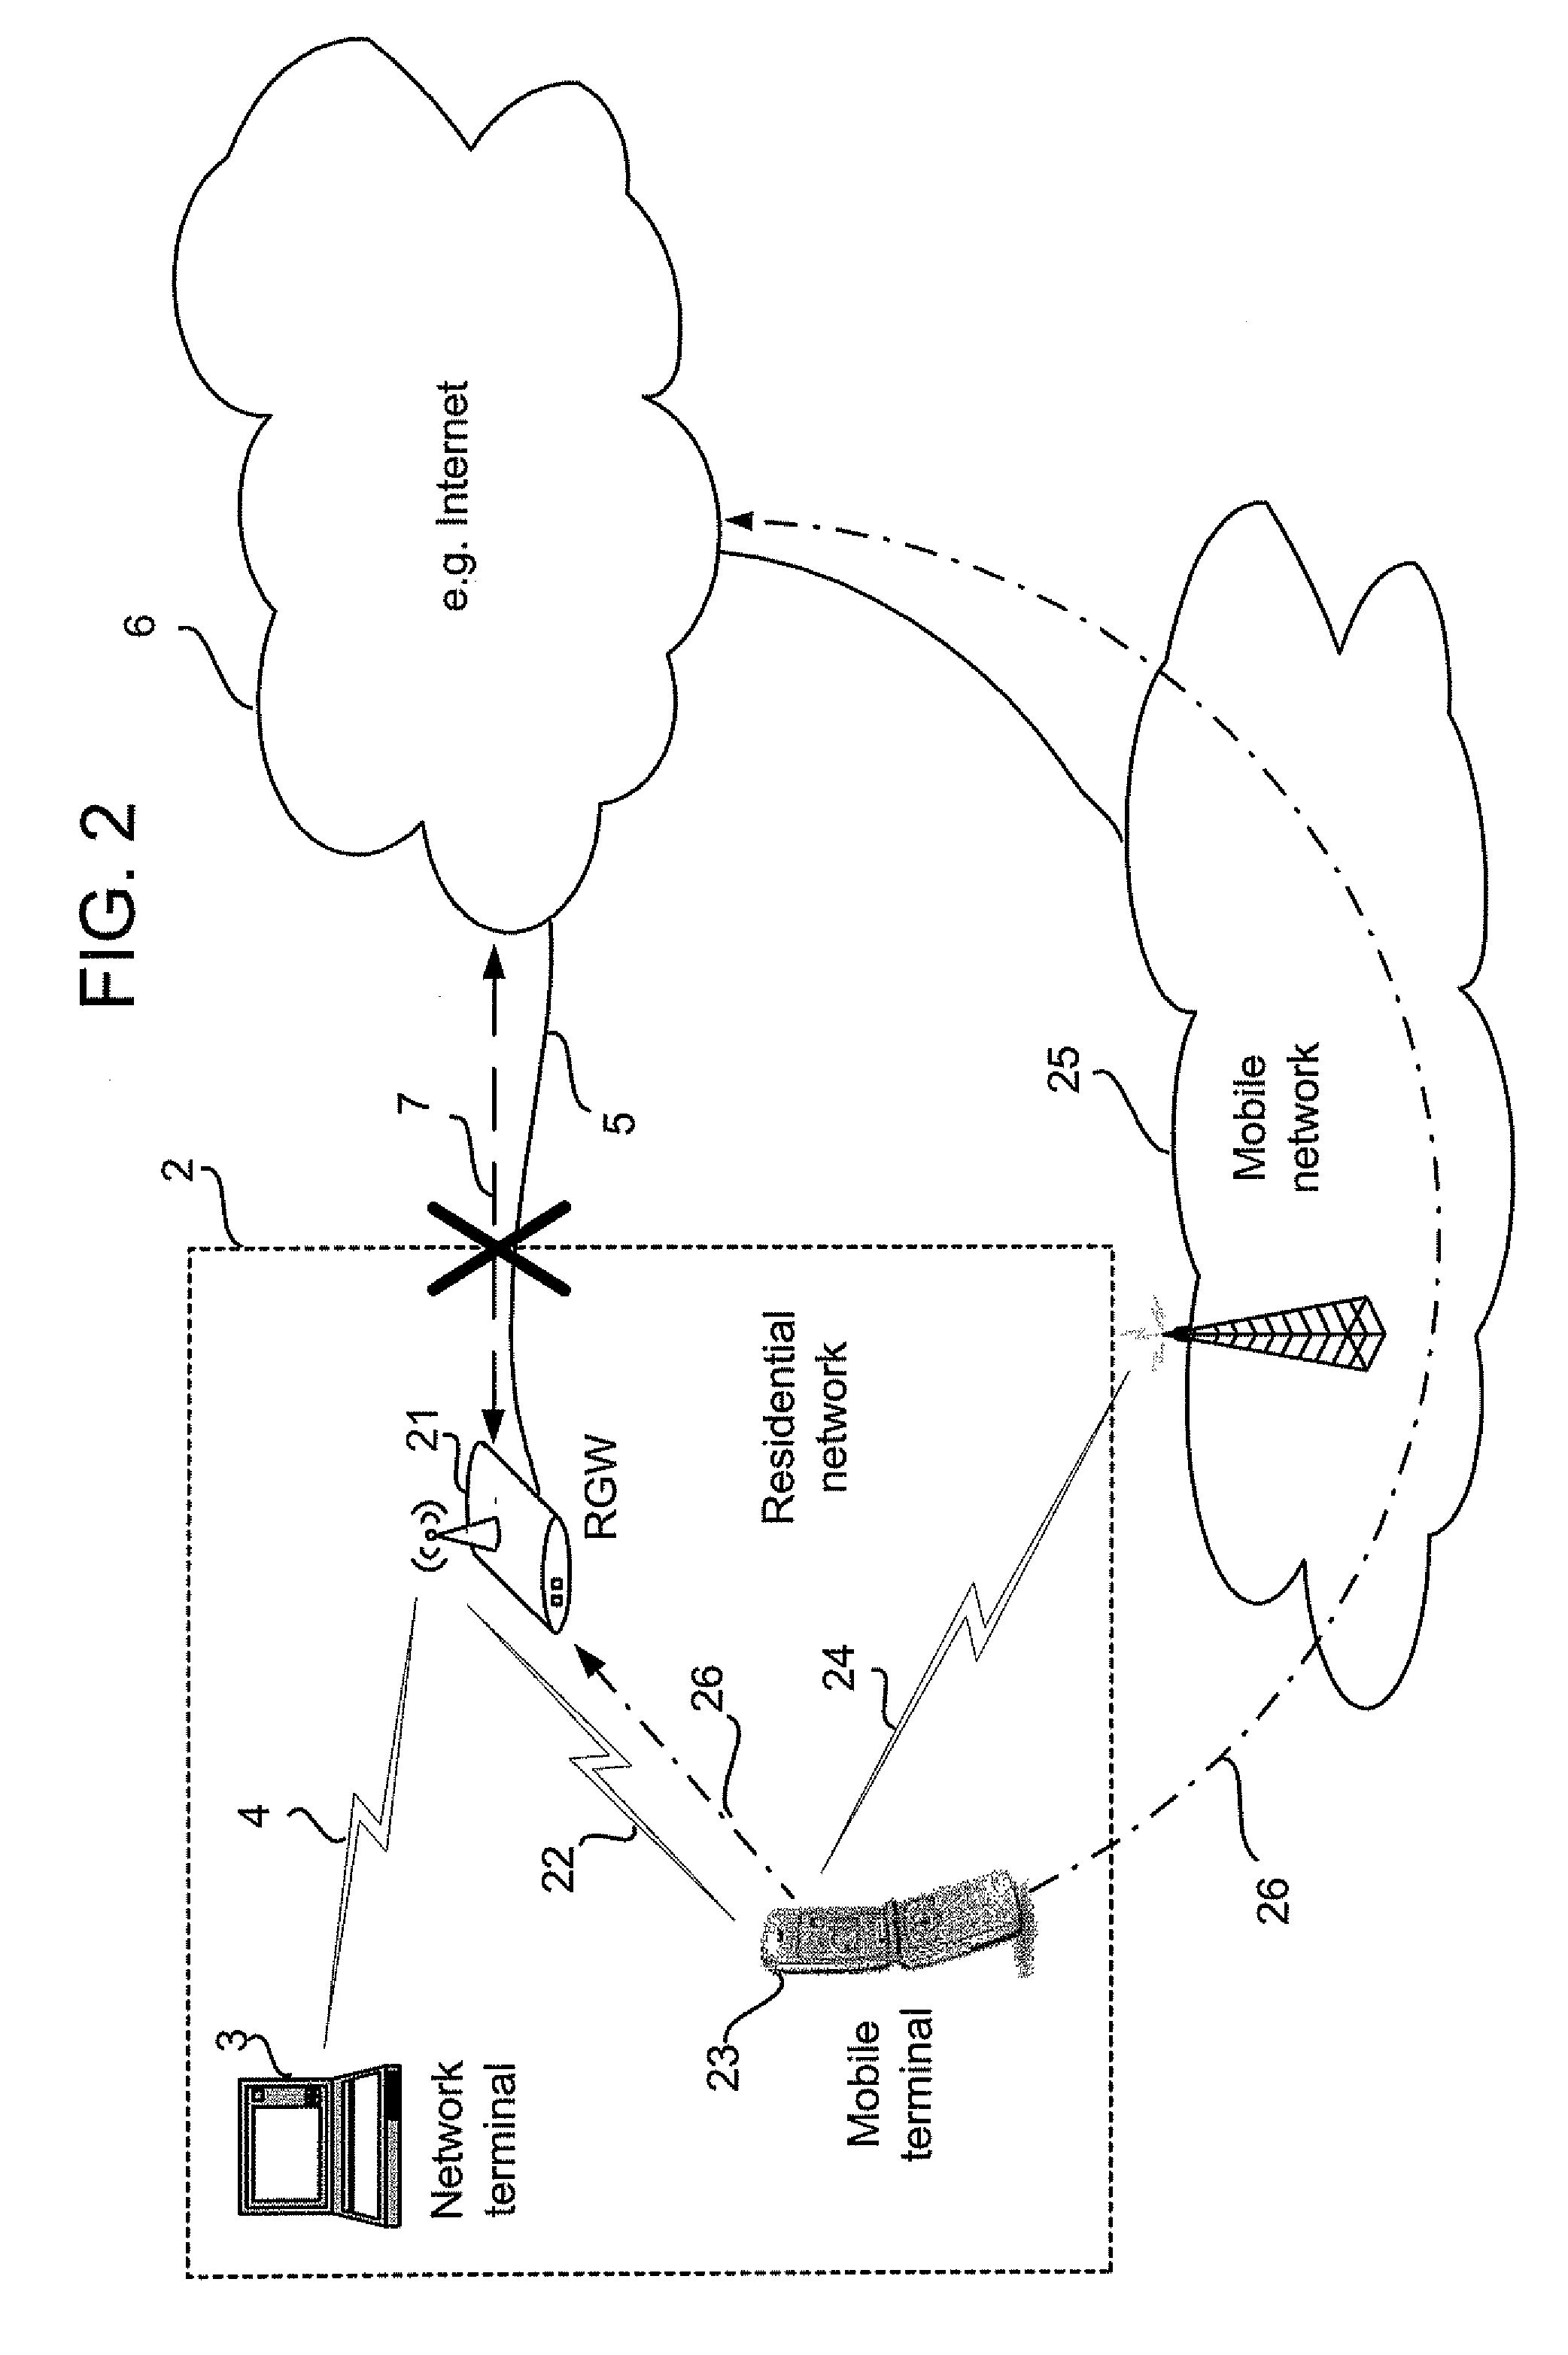 Residential gateway for providing backup interface to external network